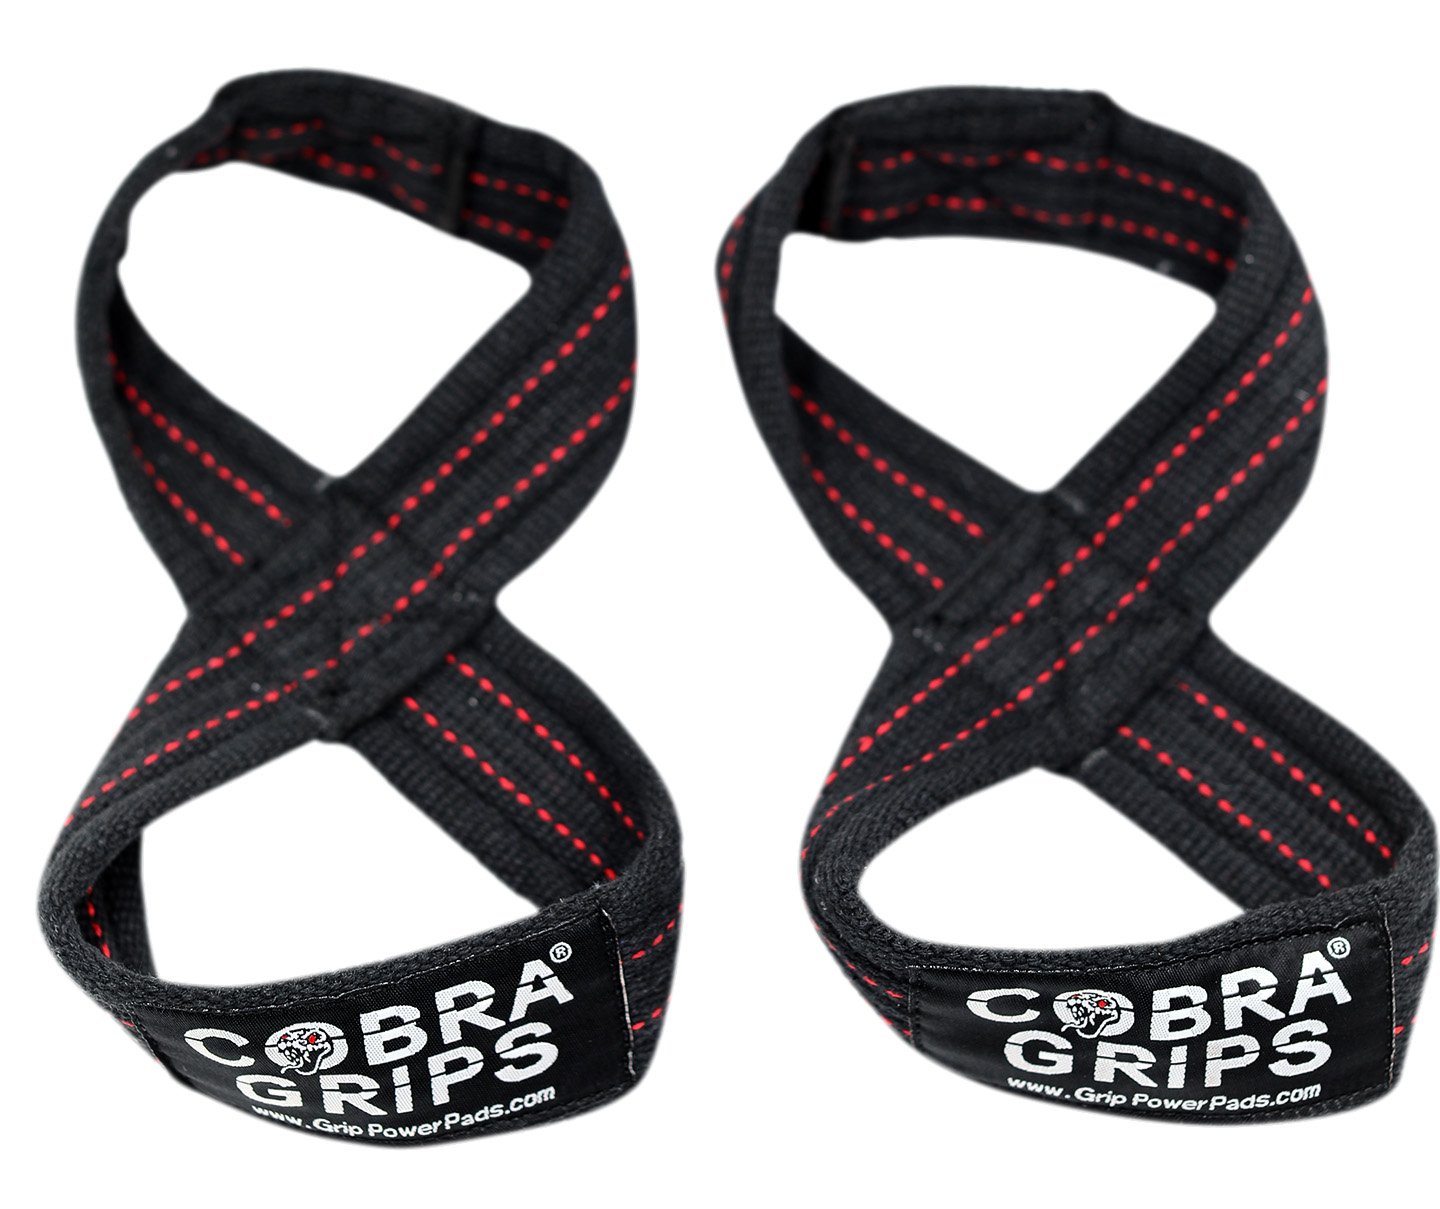 Deadlift Straps Figure 8 Loop Lifting Straps The #1 Choice for